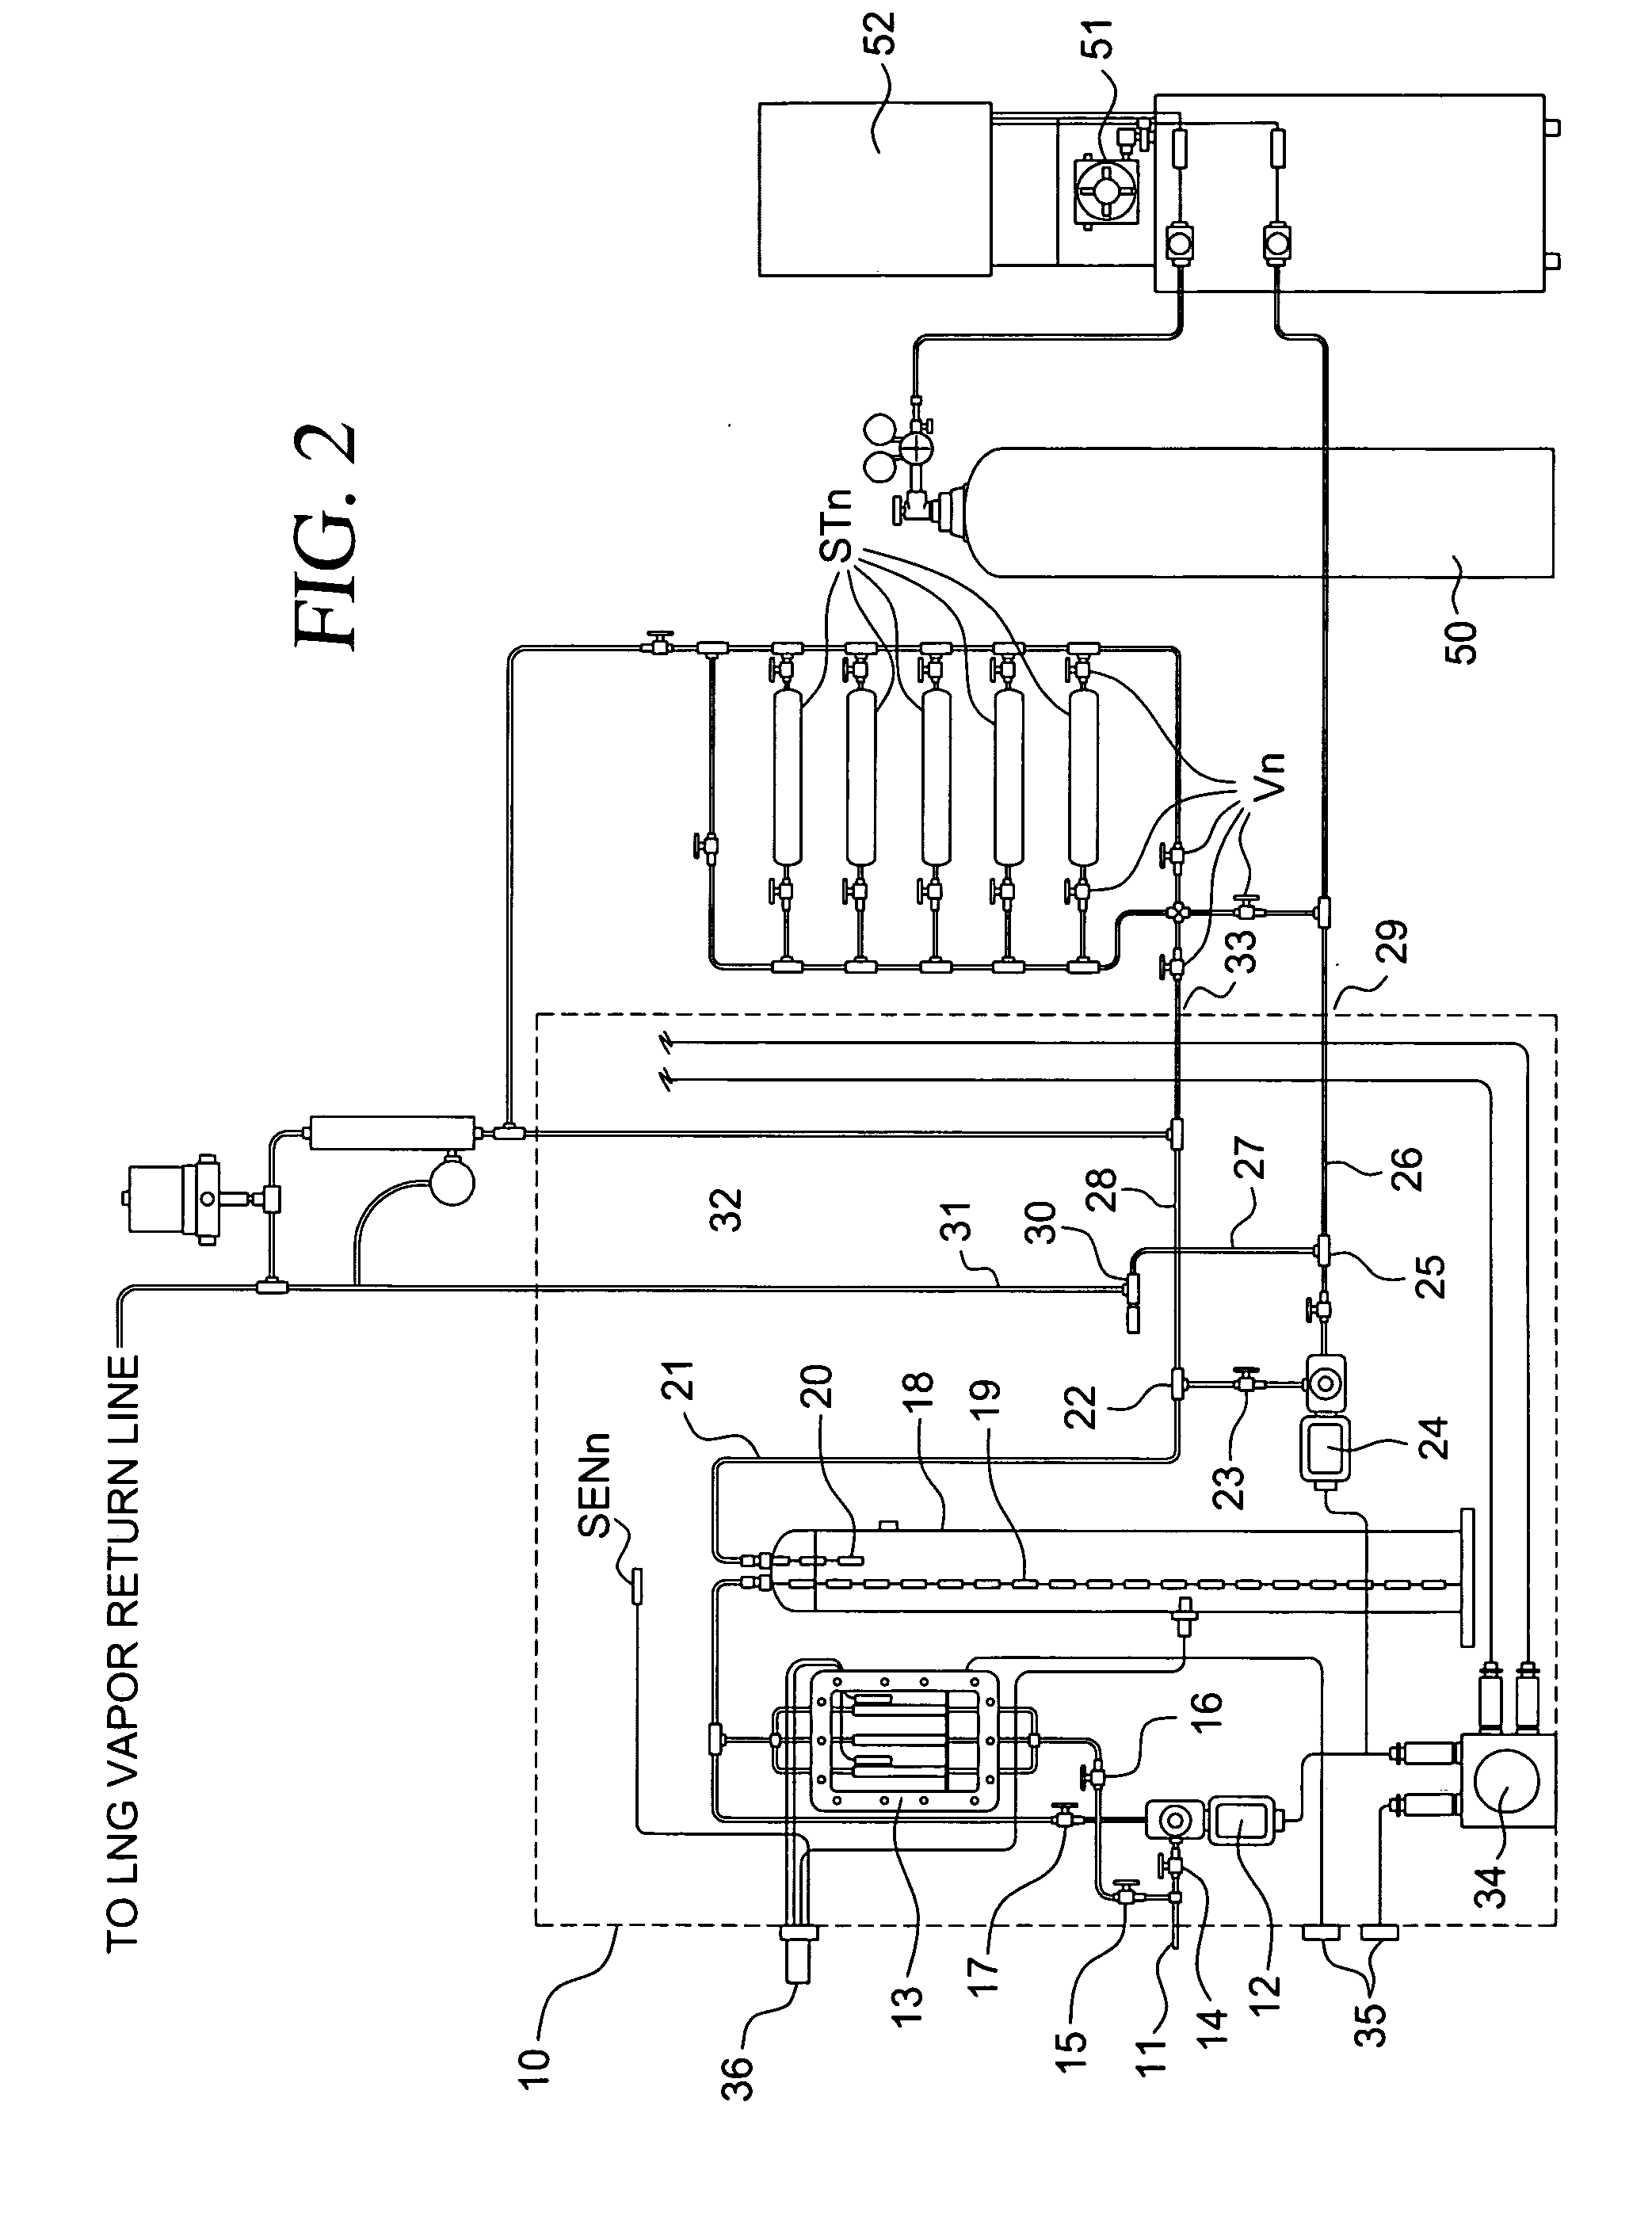 Liquid gas vaporization and measurement system and method